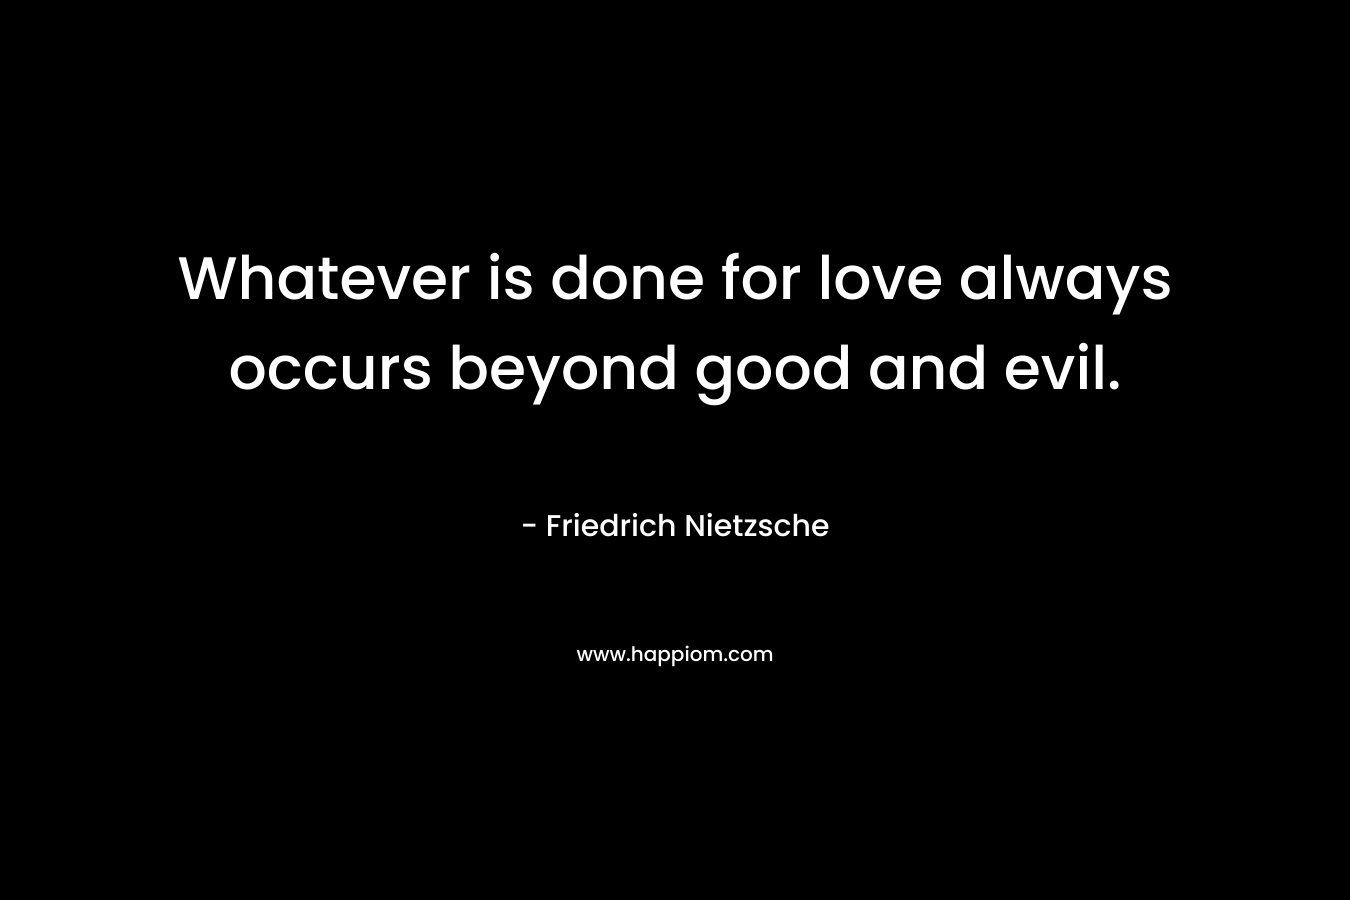 Whatever is done for love always occurs beyond good and evil.